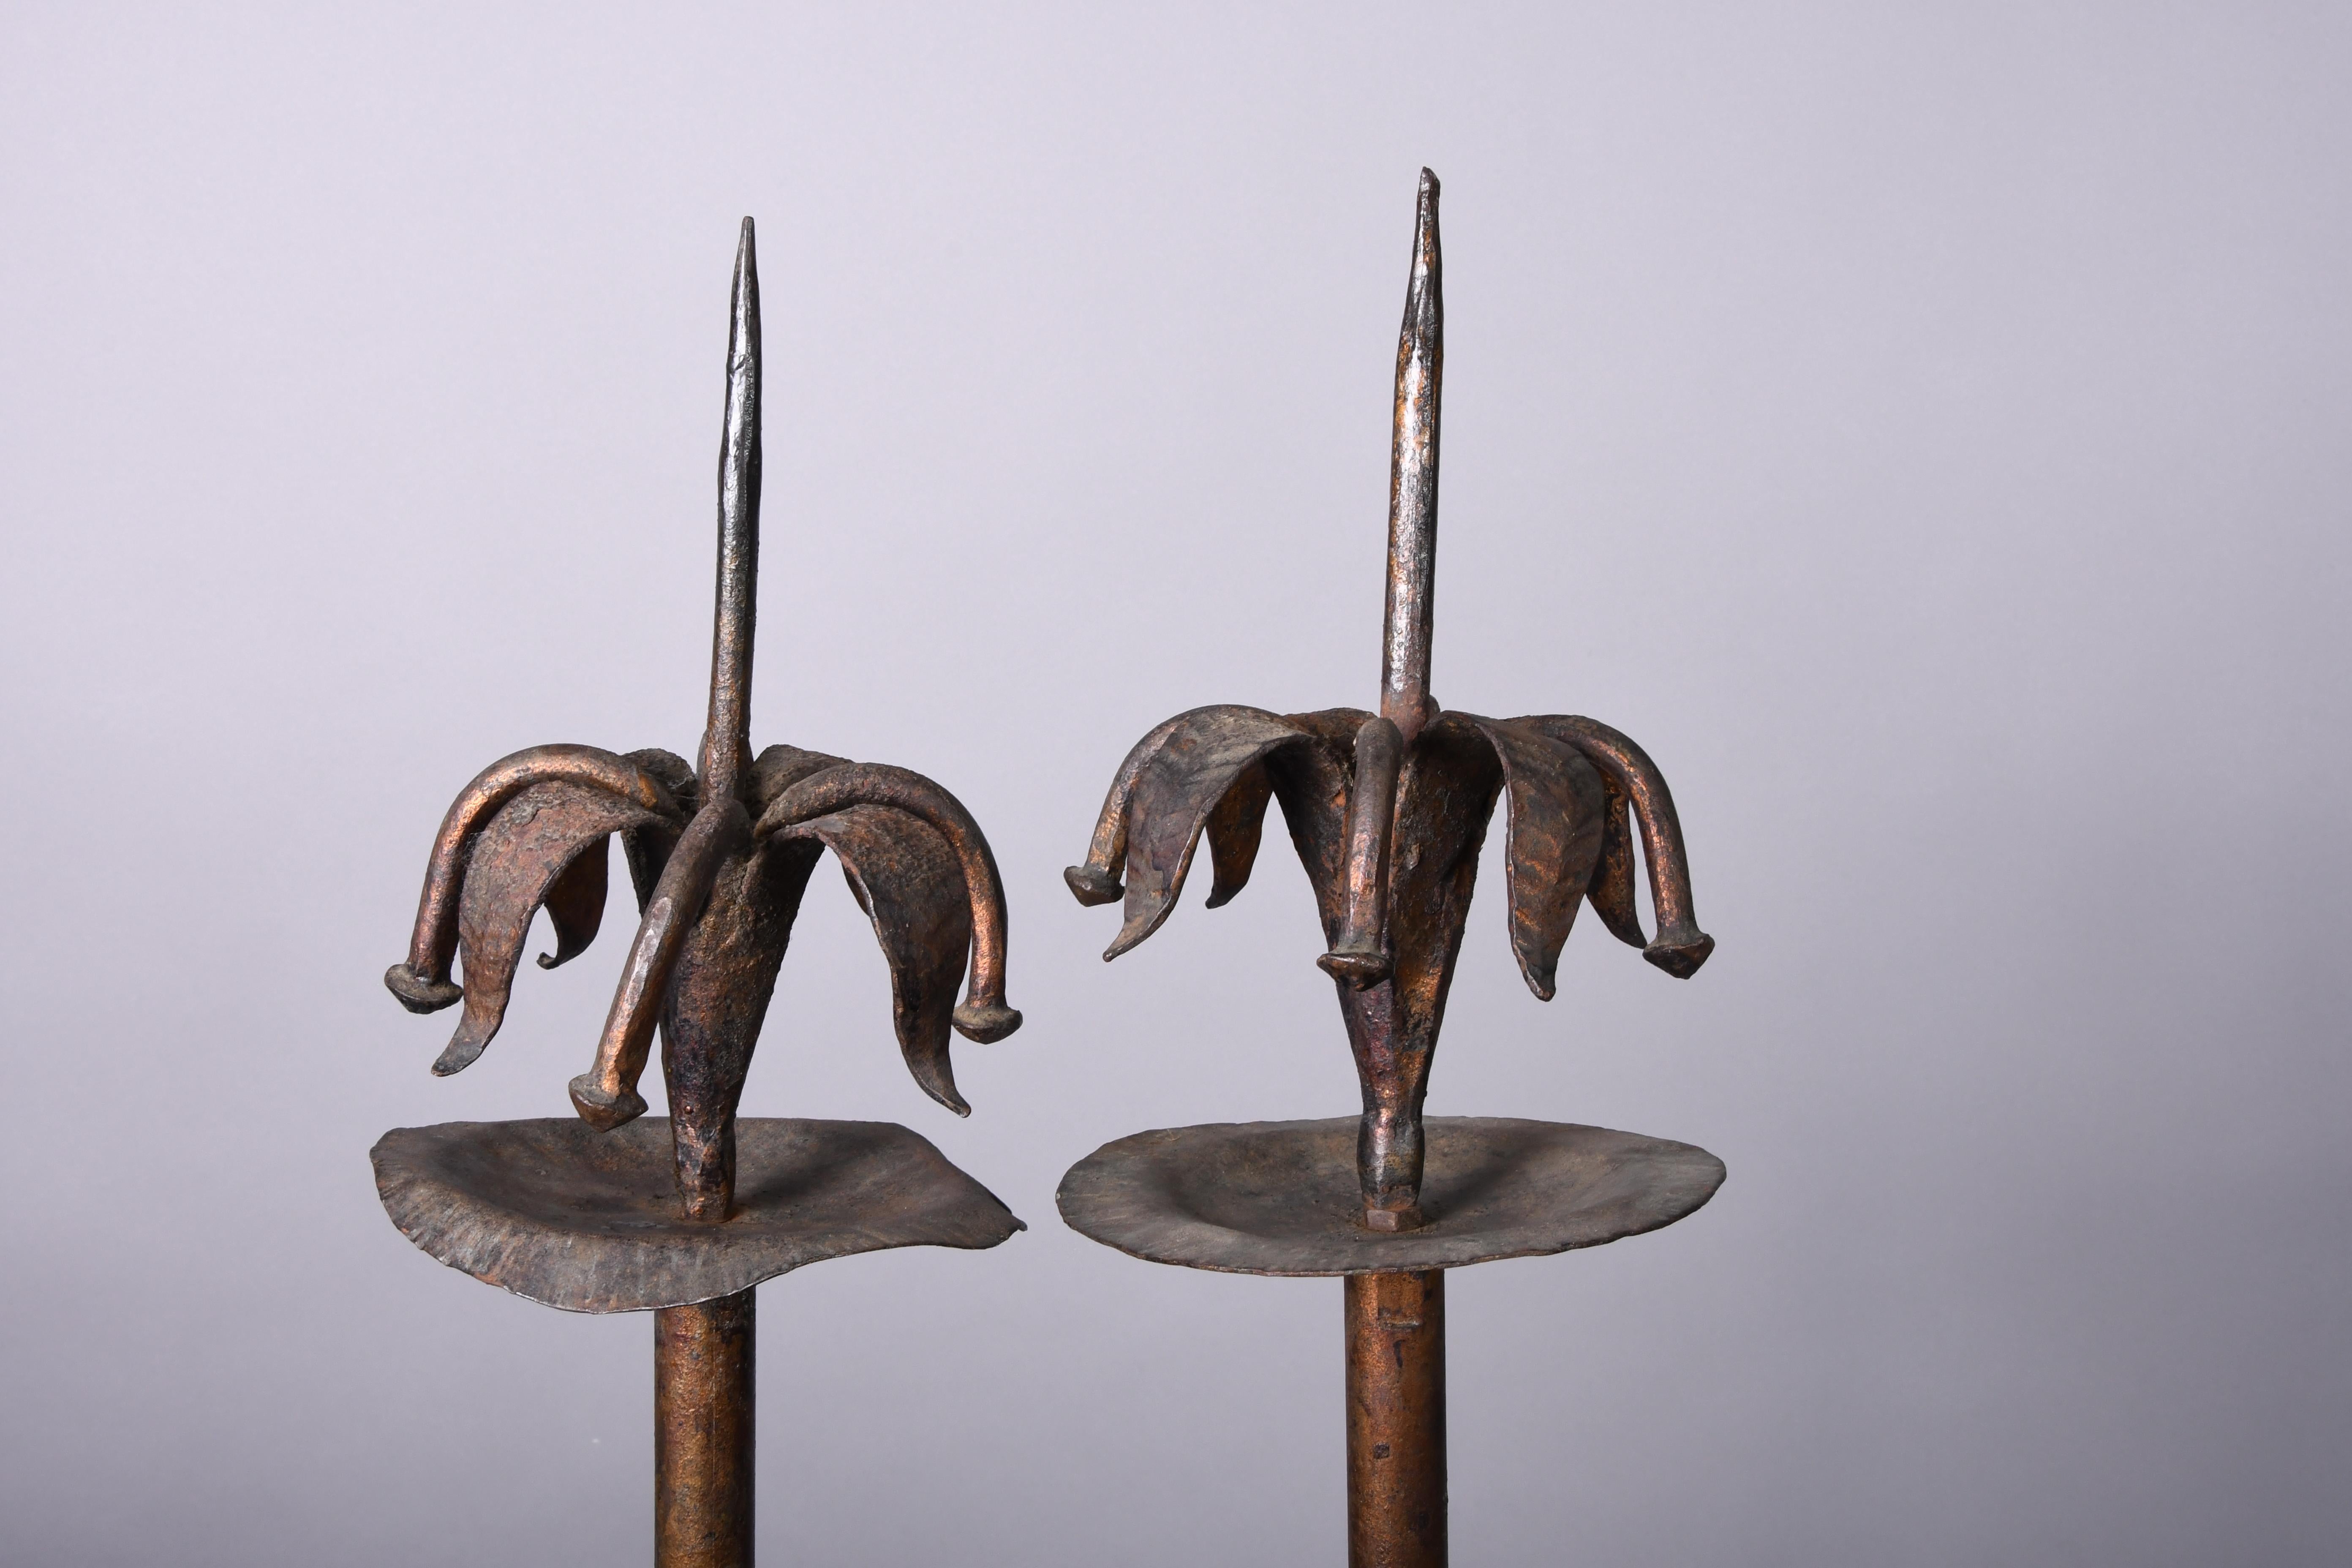 A pair of iron candleholders that around the pricket opens a flower. The stem ends on a tripod stand.